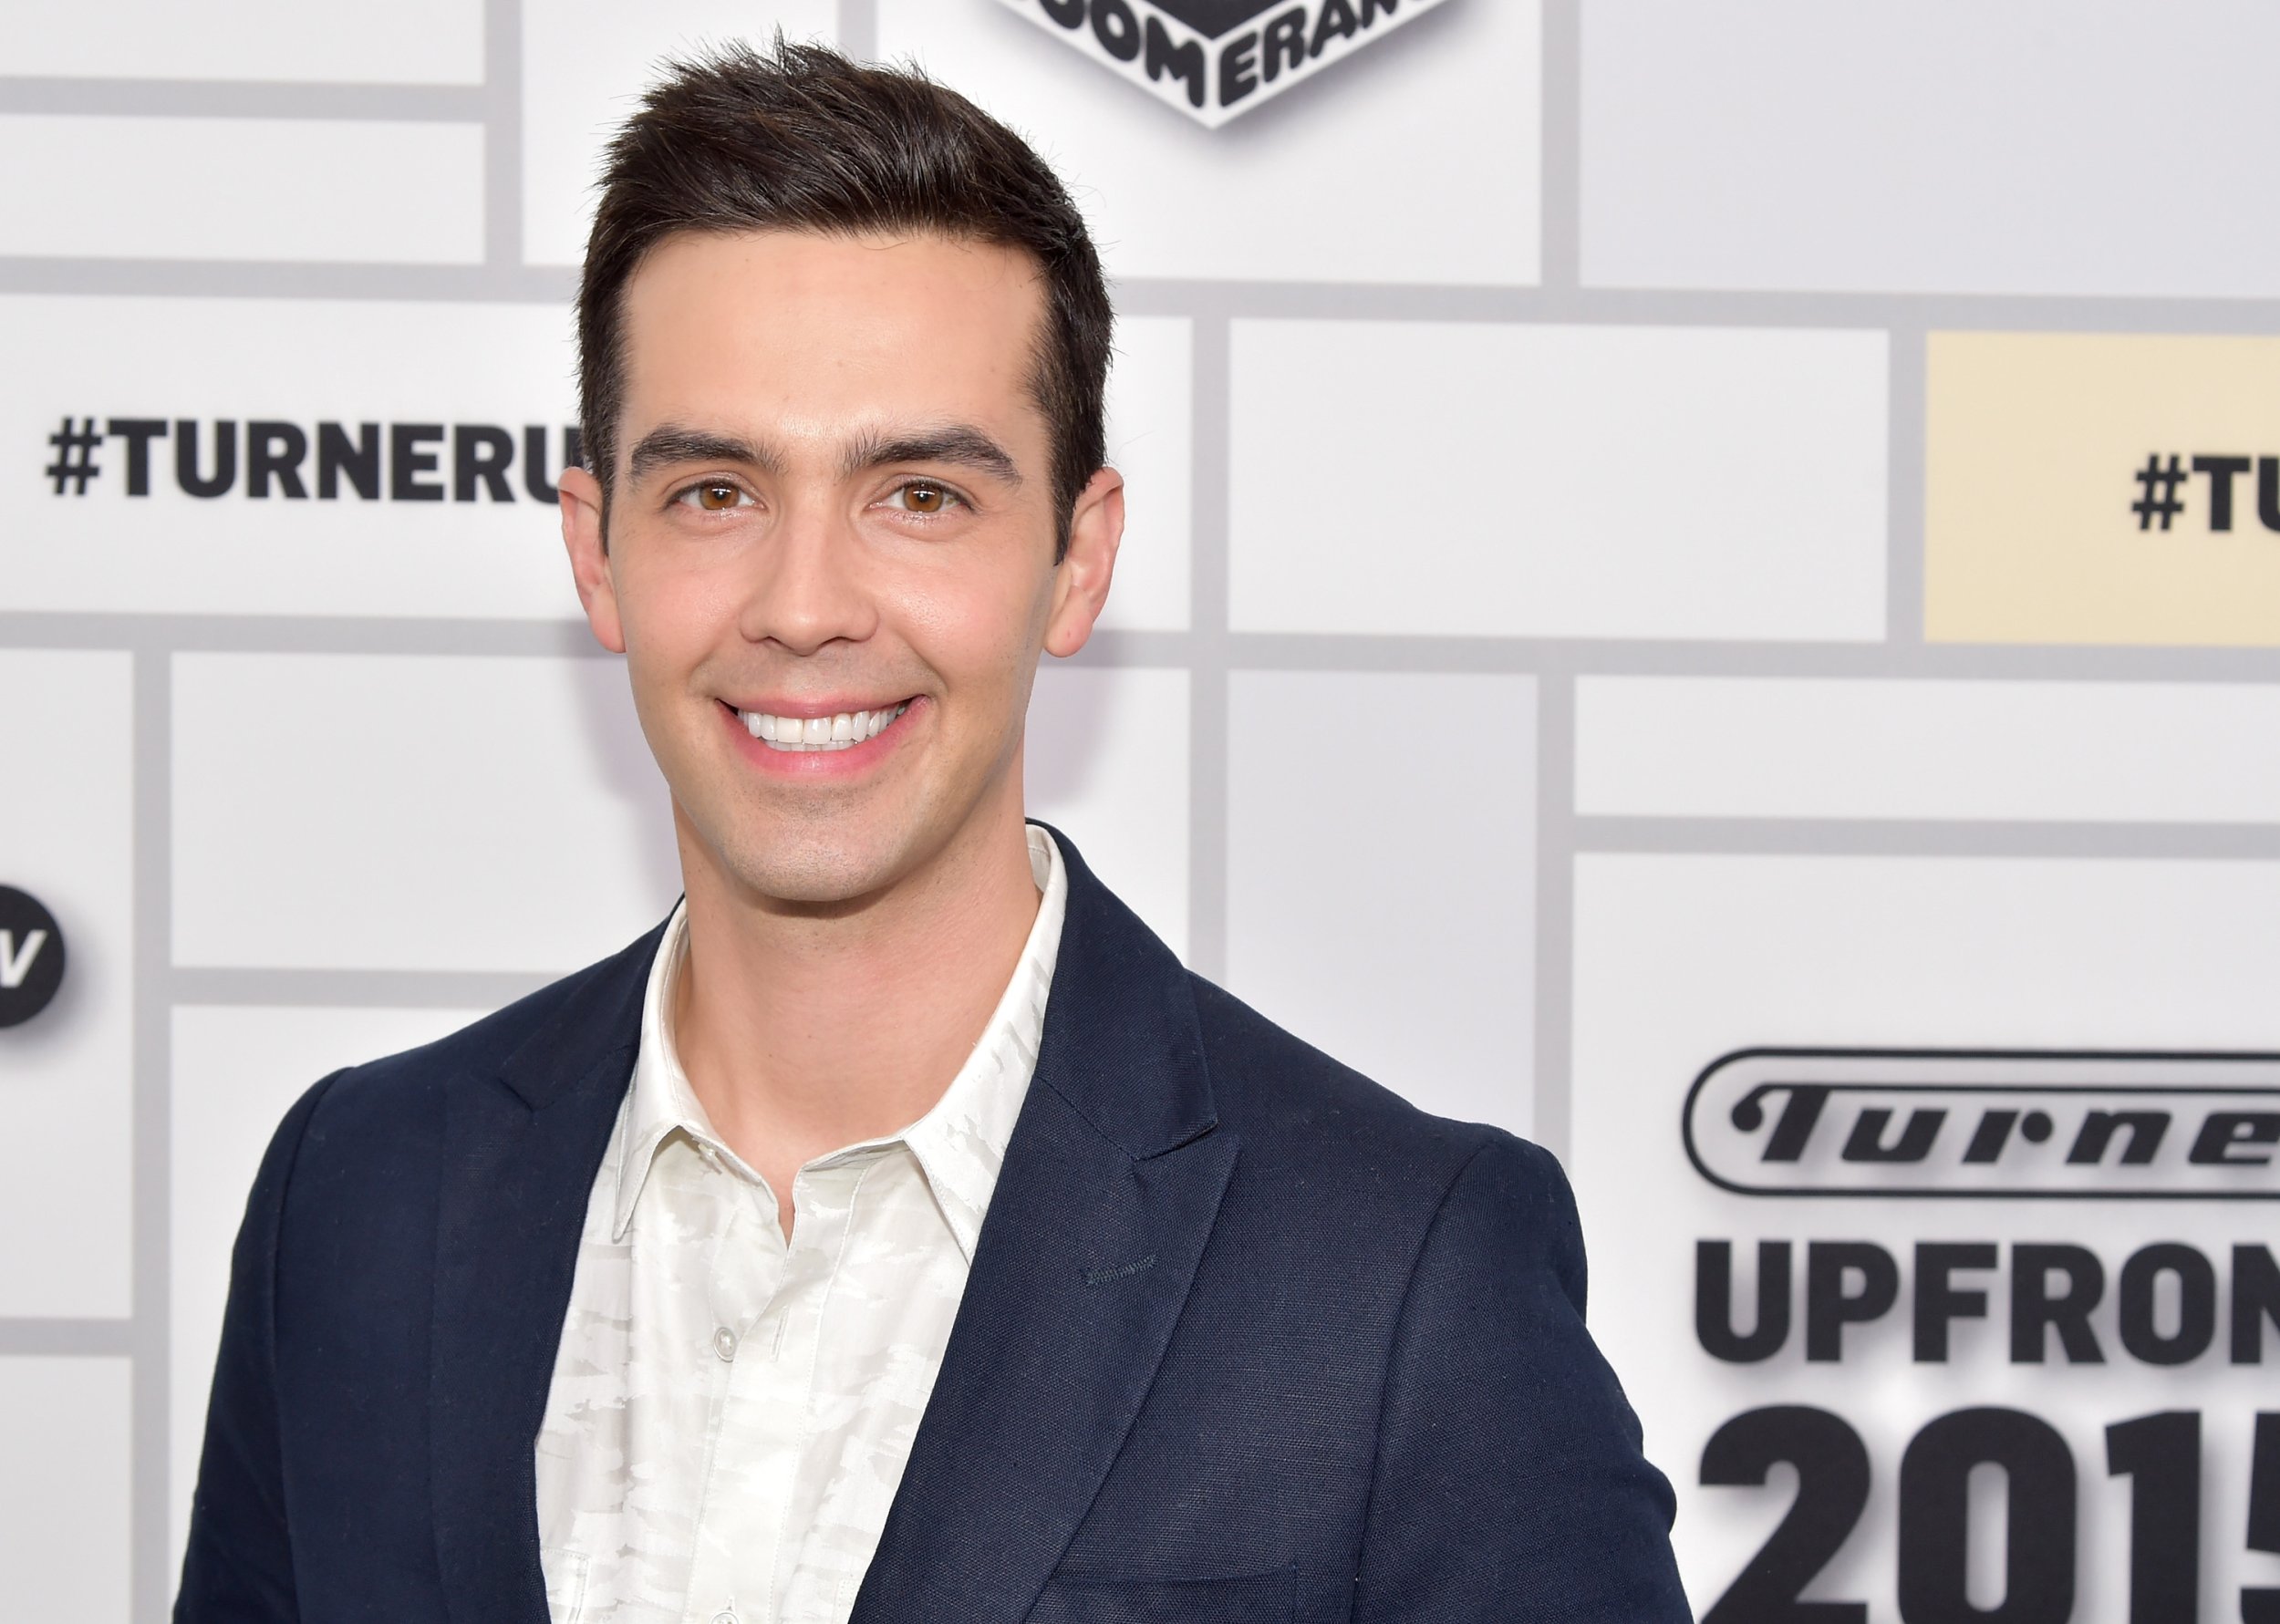 Is the carbonaro effect staged